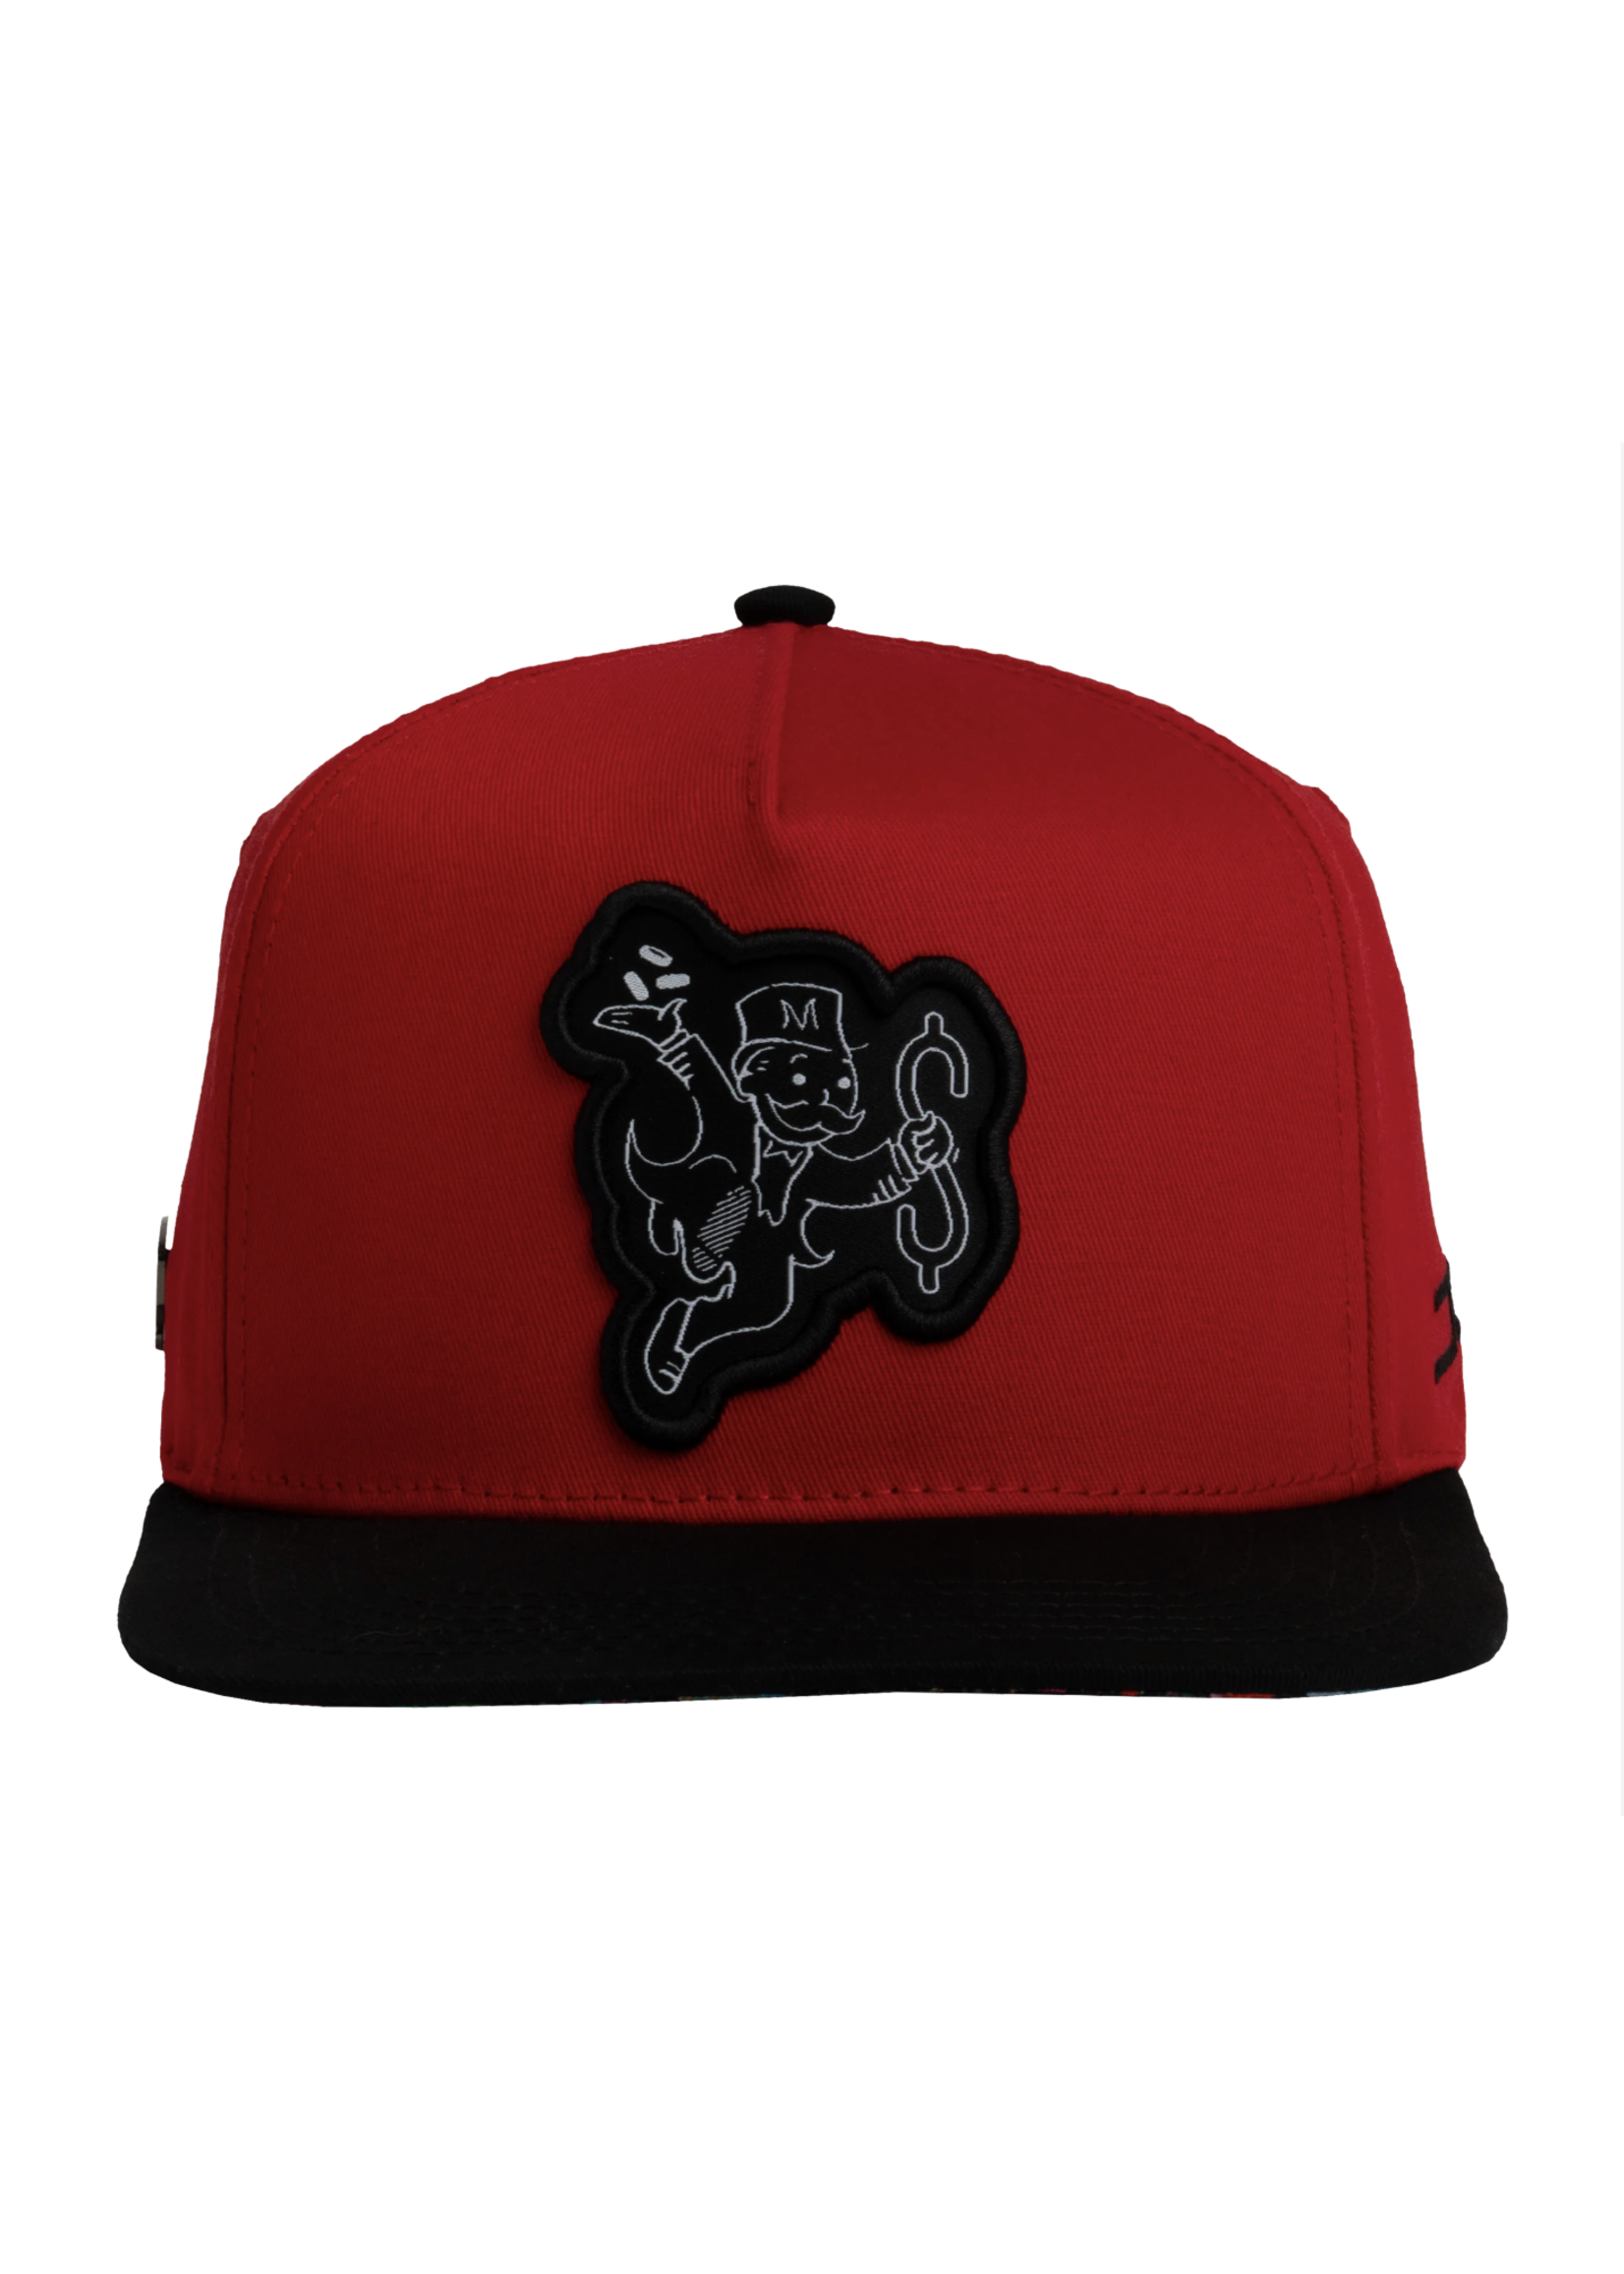 Jump Red Hat